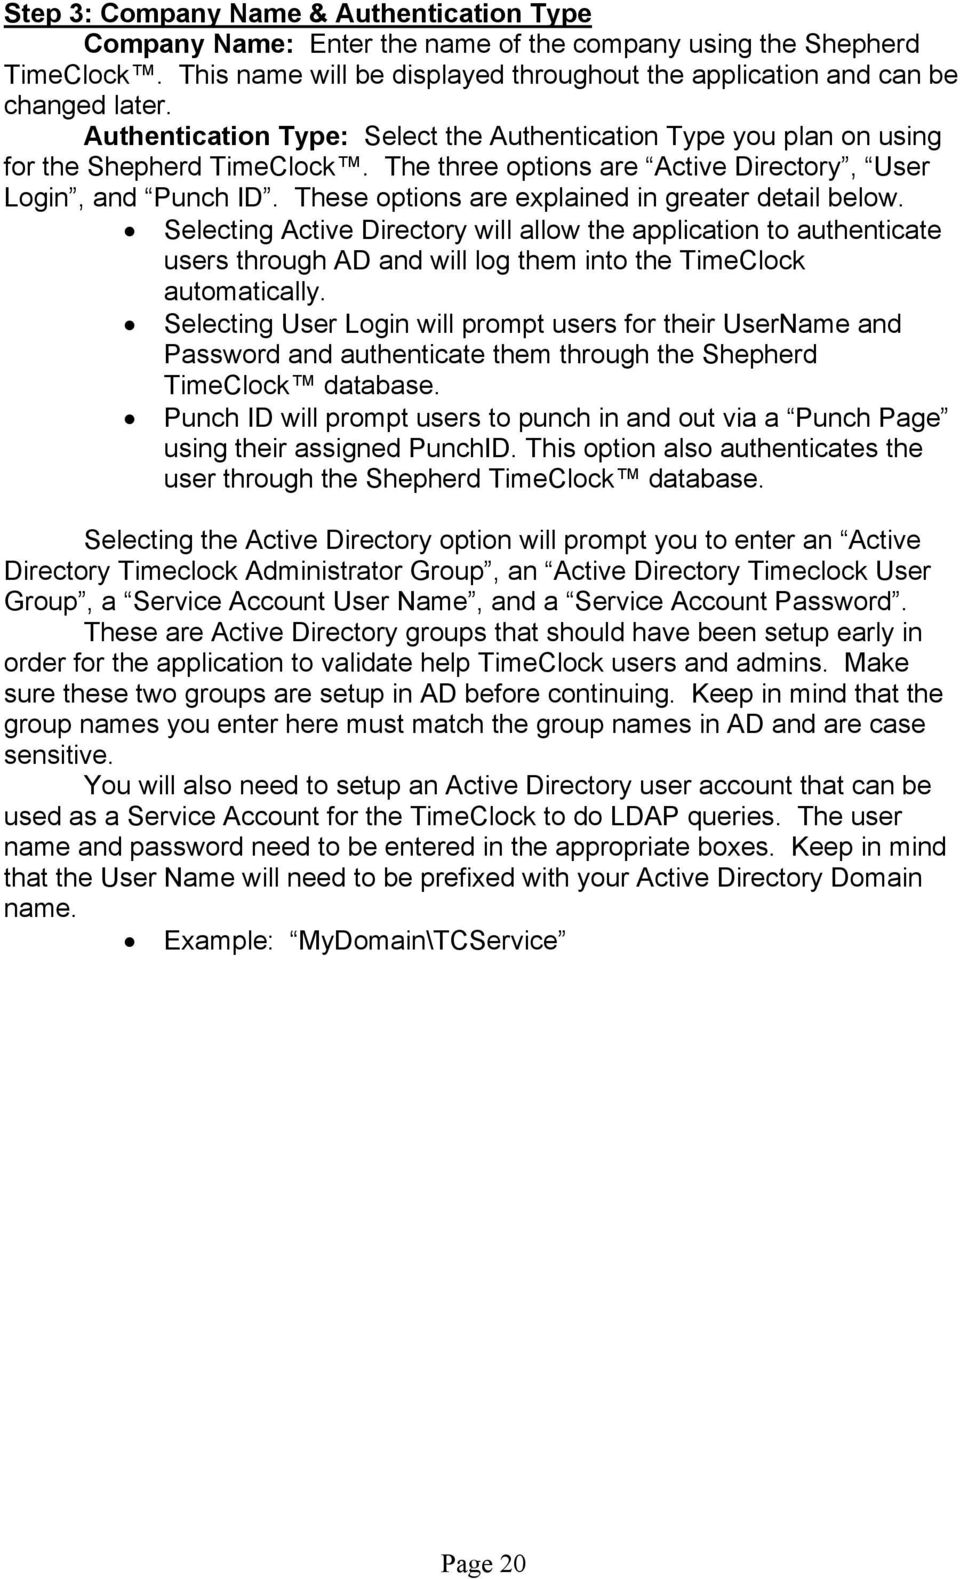 These options are explained in greater detail below. Selecting Active Directory will allow the application to authenticate users through AD and will log them into the TimeClock automatically.